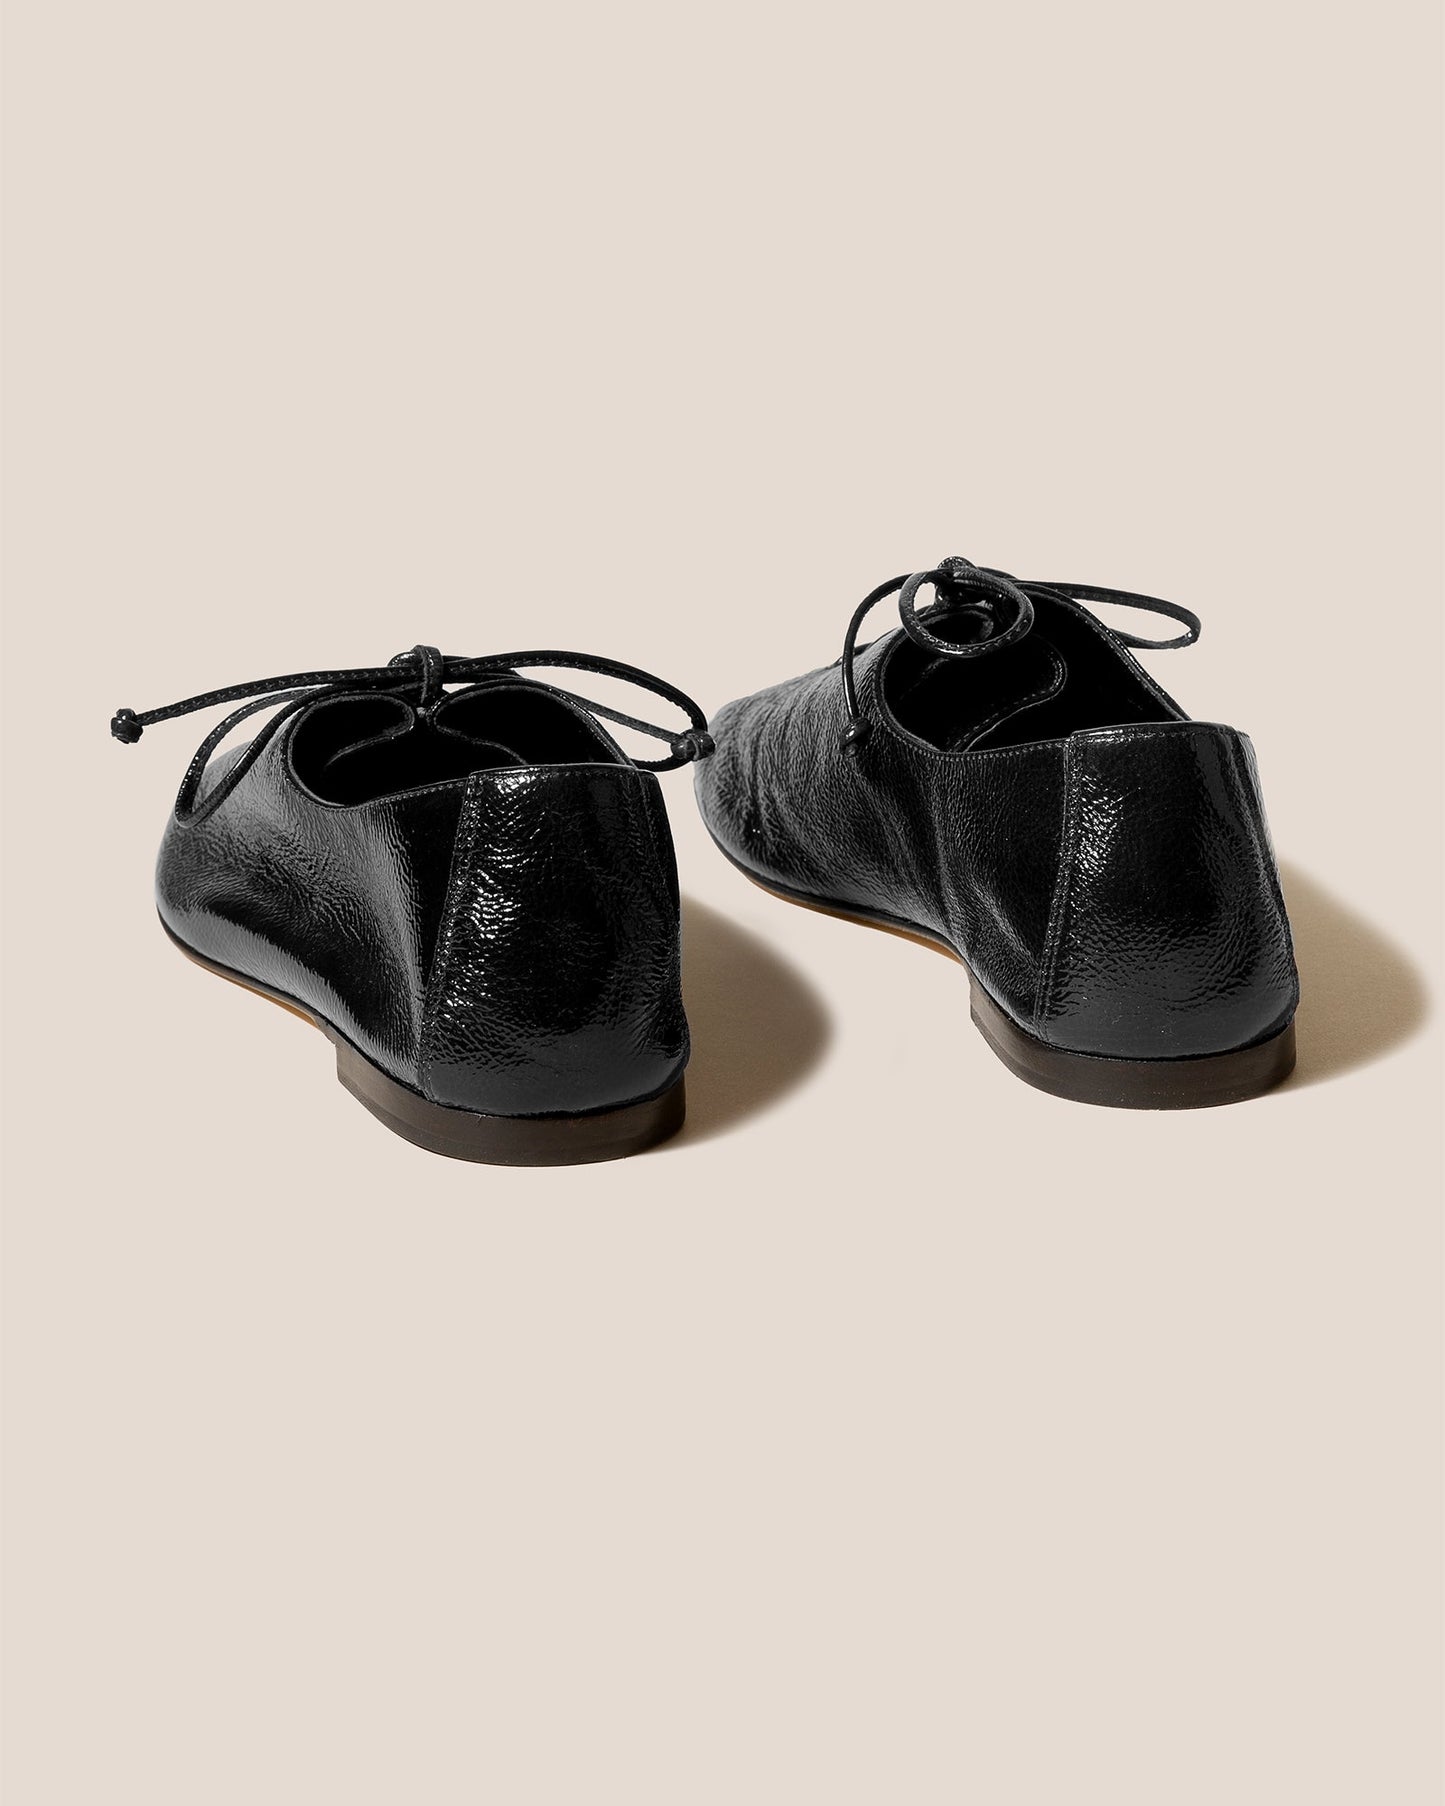 PLEGADA CRINKLED GLOSSY - Deconstructed Lace-up Shoe